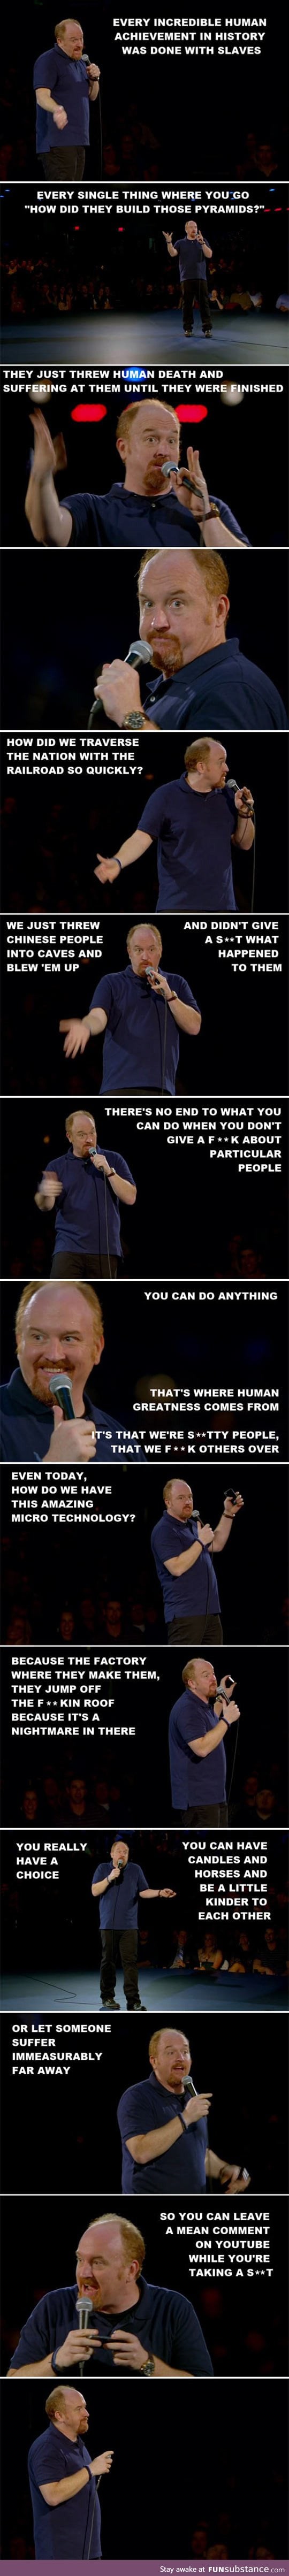 Louis C.K. On our human nature